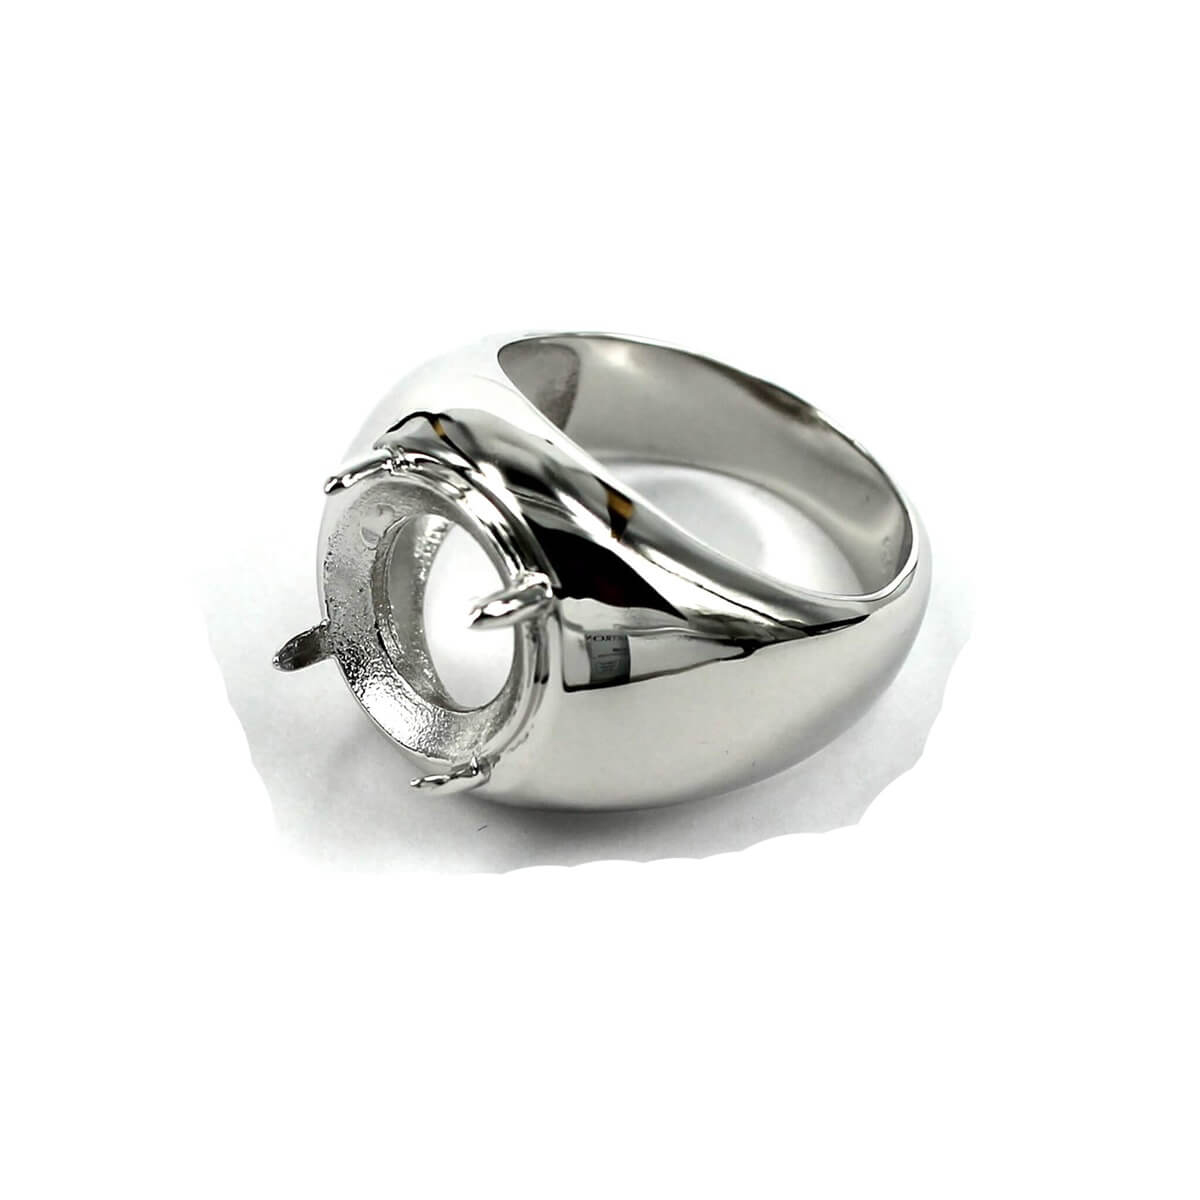 Ring with Round Prongs Mounting in Sterling Silver 12mm